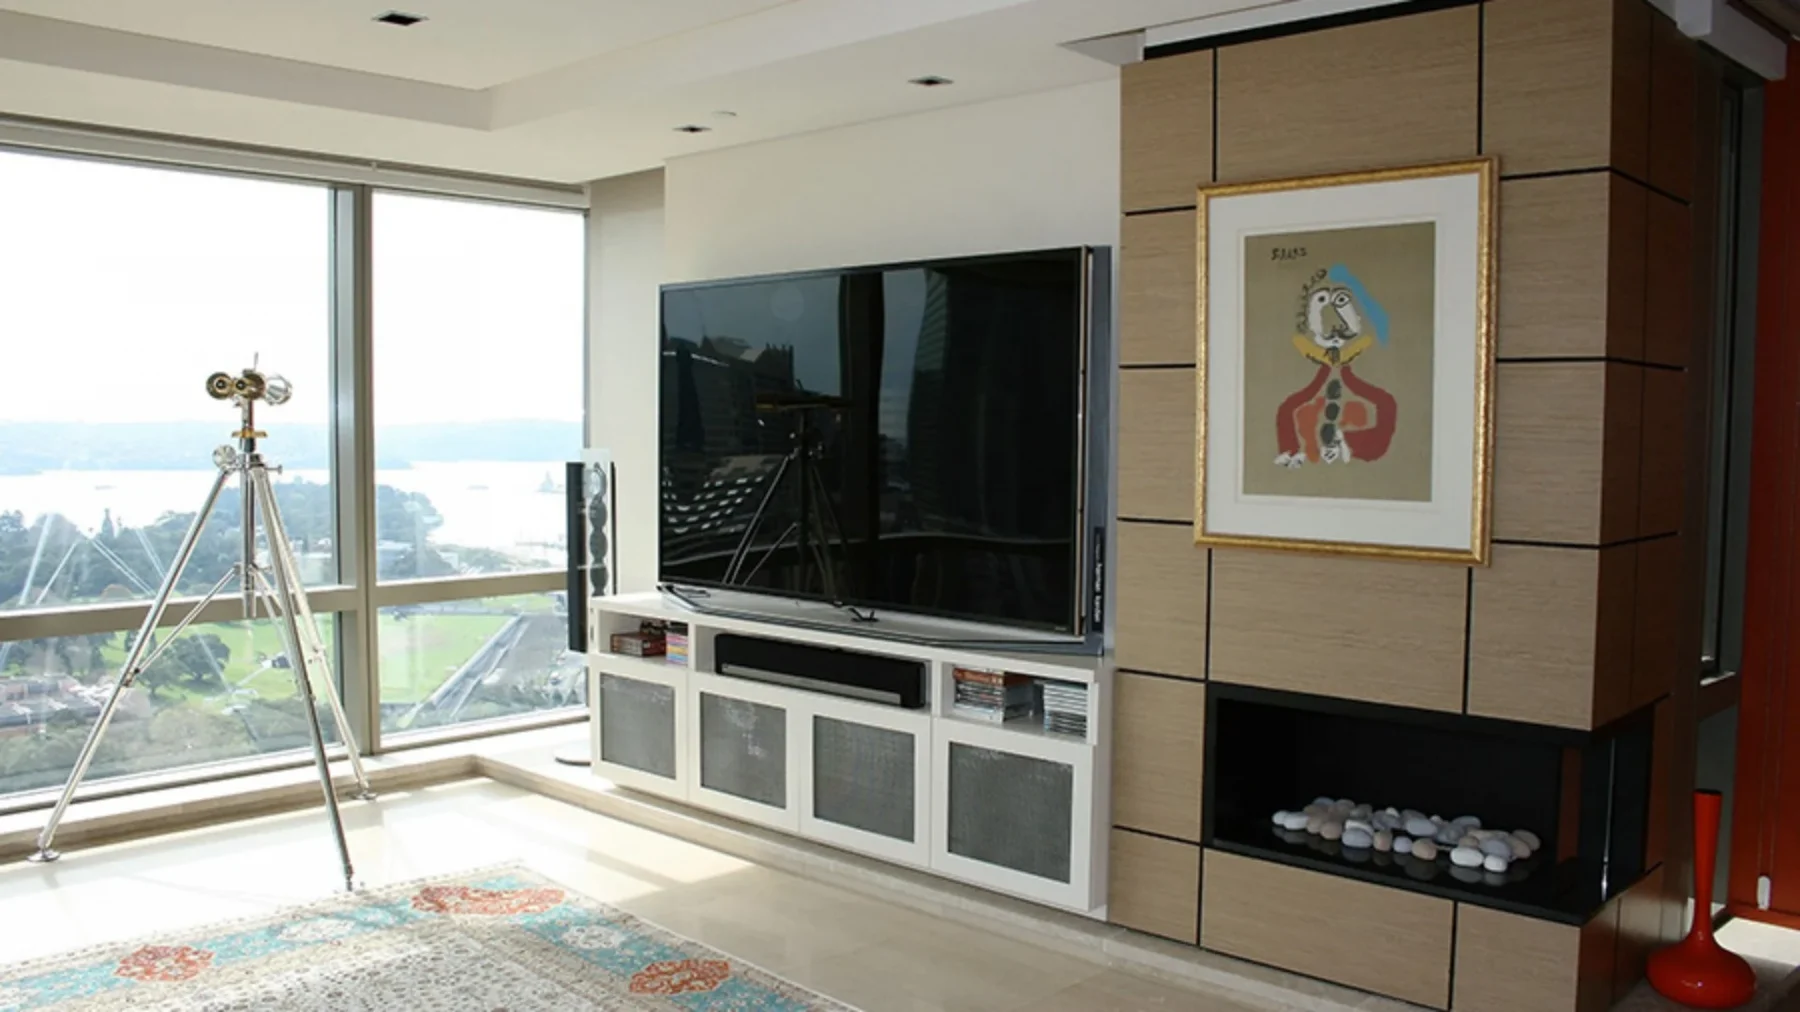 Custom-made Entertainment unit in Sydney CBD. Poly is painted in vivid white with shaker-style doors. Custom-made joinery and cabinet making.